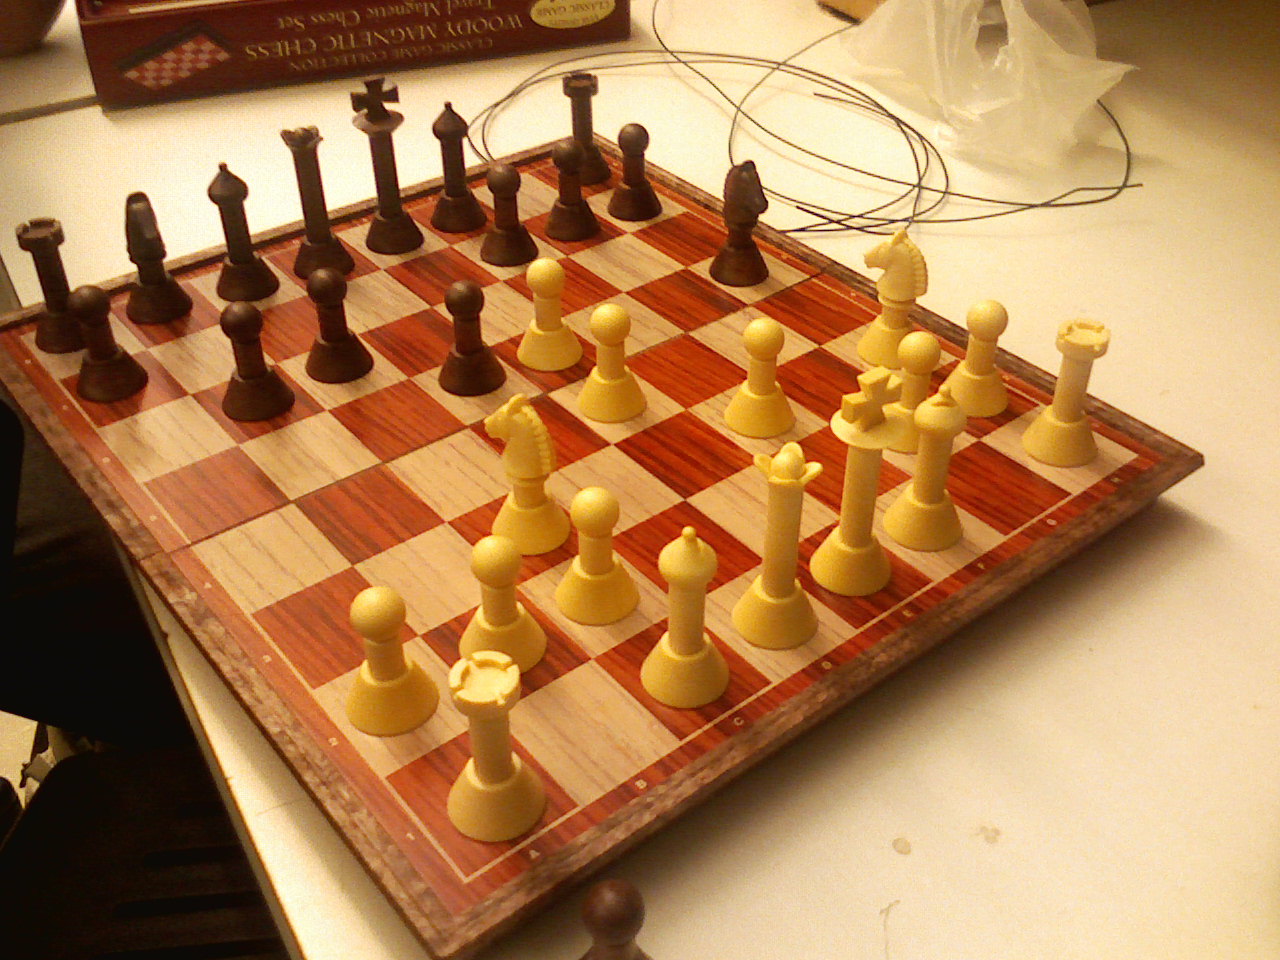 There's a picture of a chess set here